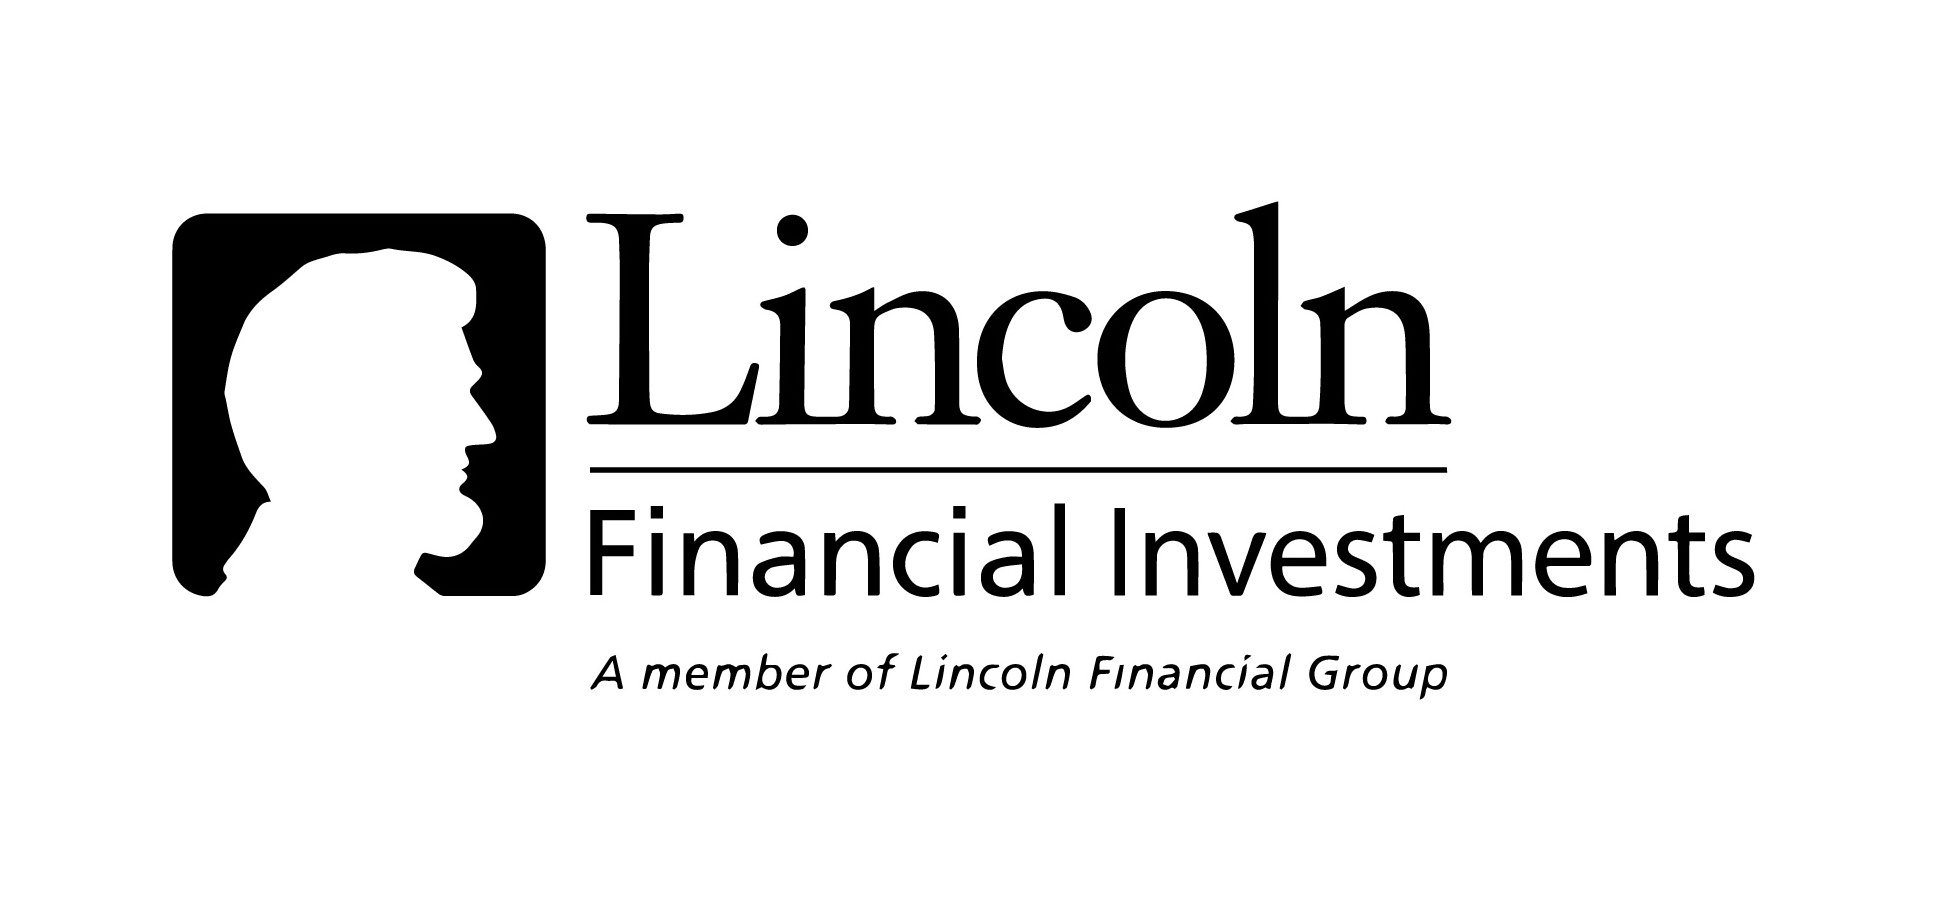  LINCOLN FINANCIAL INVESTMENTS A MEMBER OF LINCOLN FINANCIAL GROUP